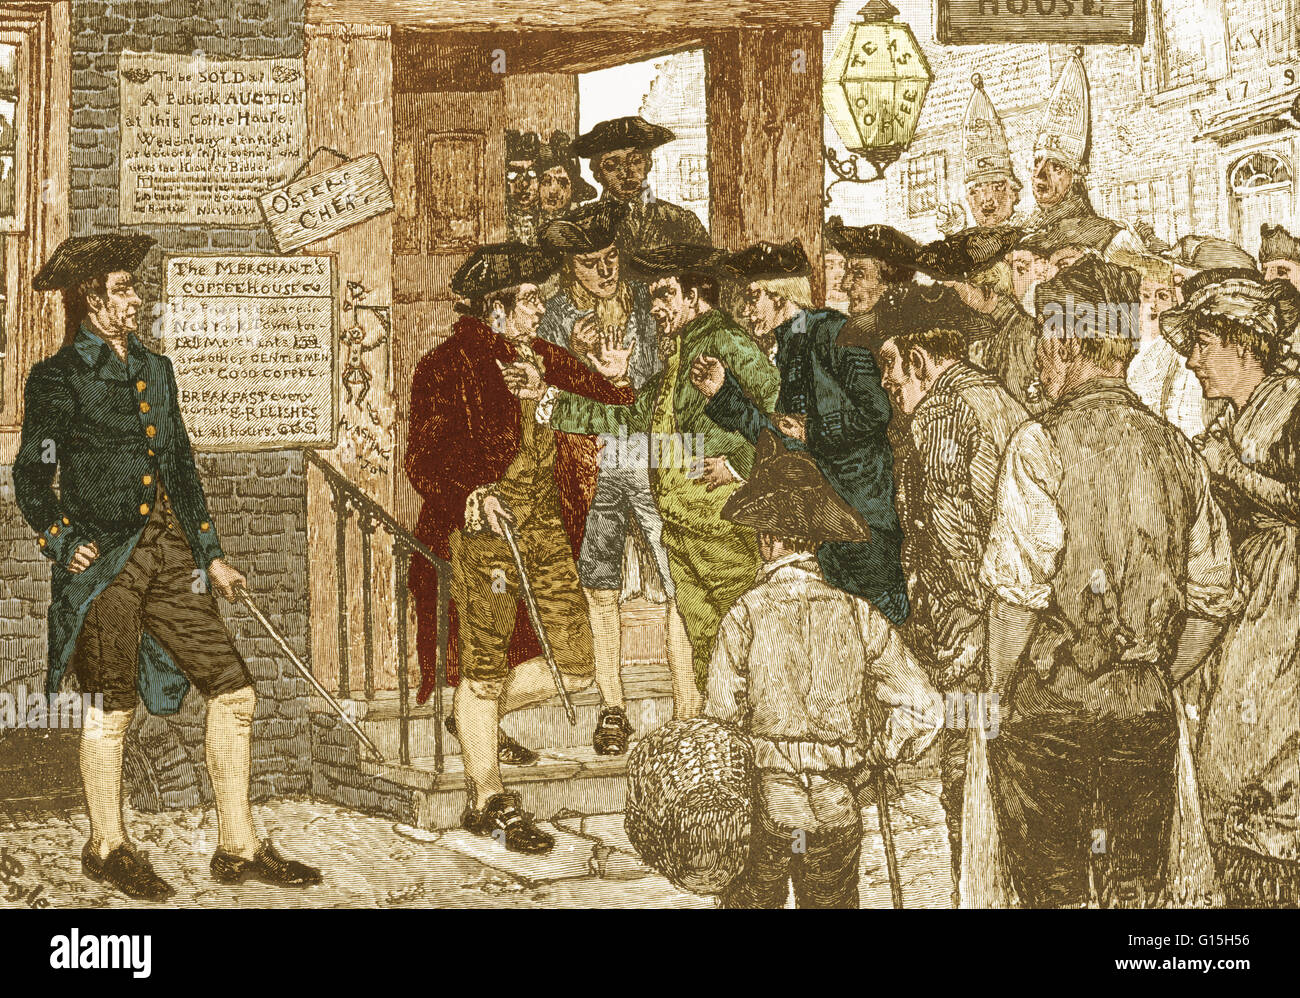 An 18th century angry mob attempting to force a stamp officer to resign, in an illustration by Howard Pyle from Harper's Magazine, March 1882. The Stamp Act of 1765 was a tax imposed by the British Parliament on the colonies of British America. It was dep Stock Photo